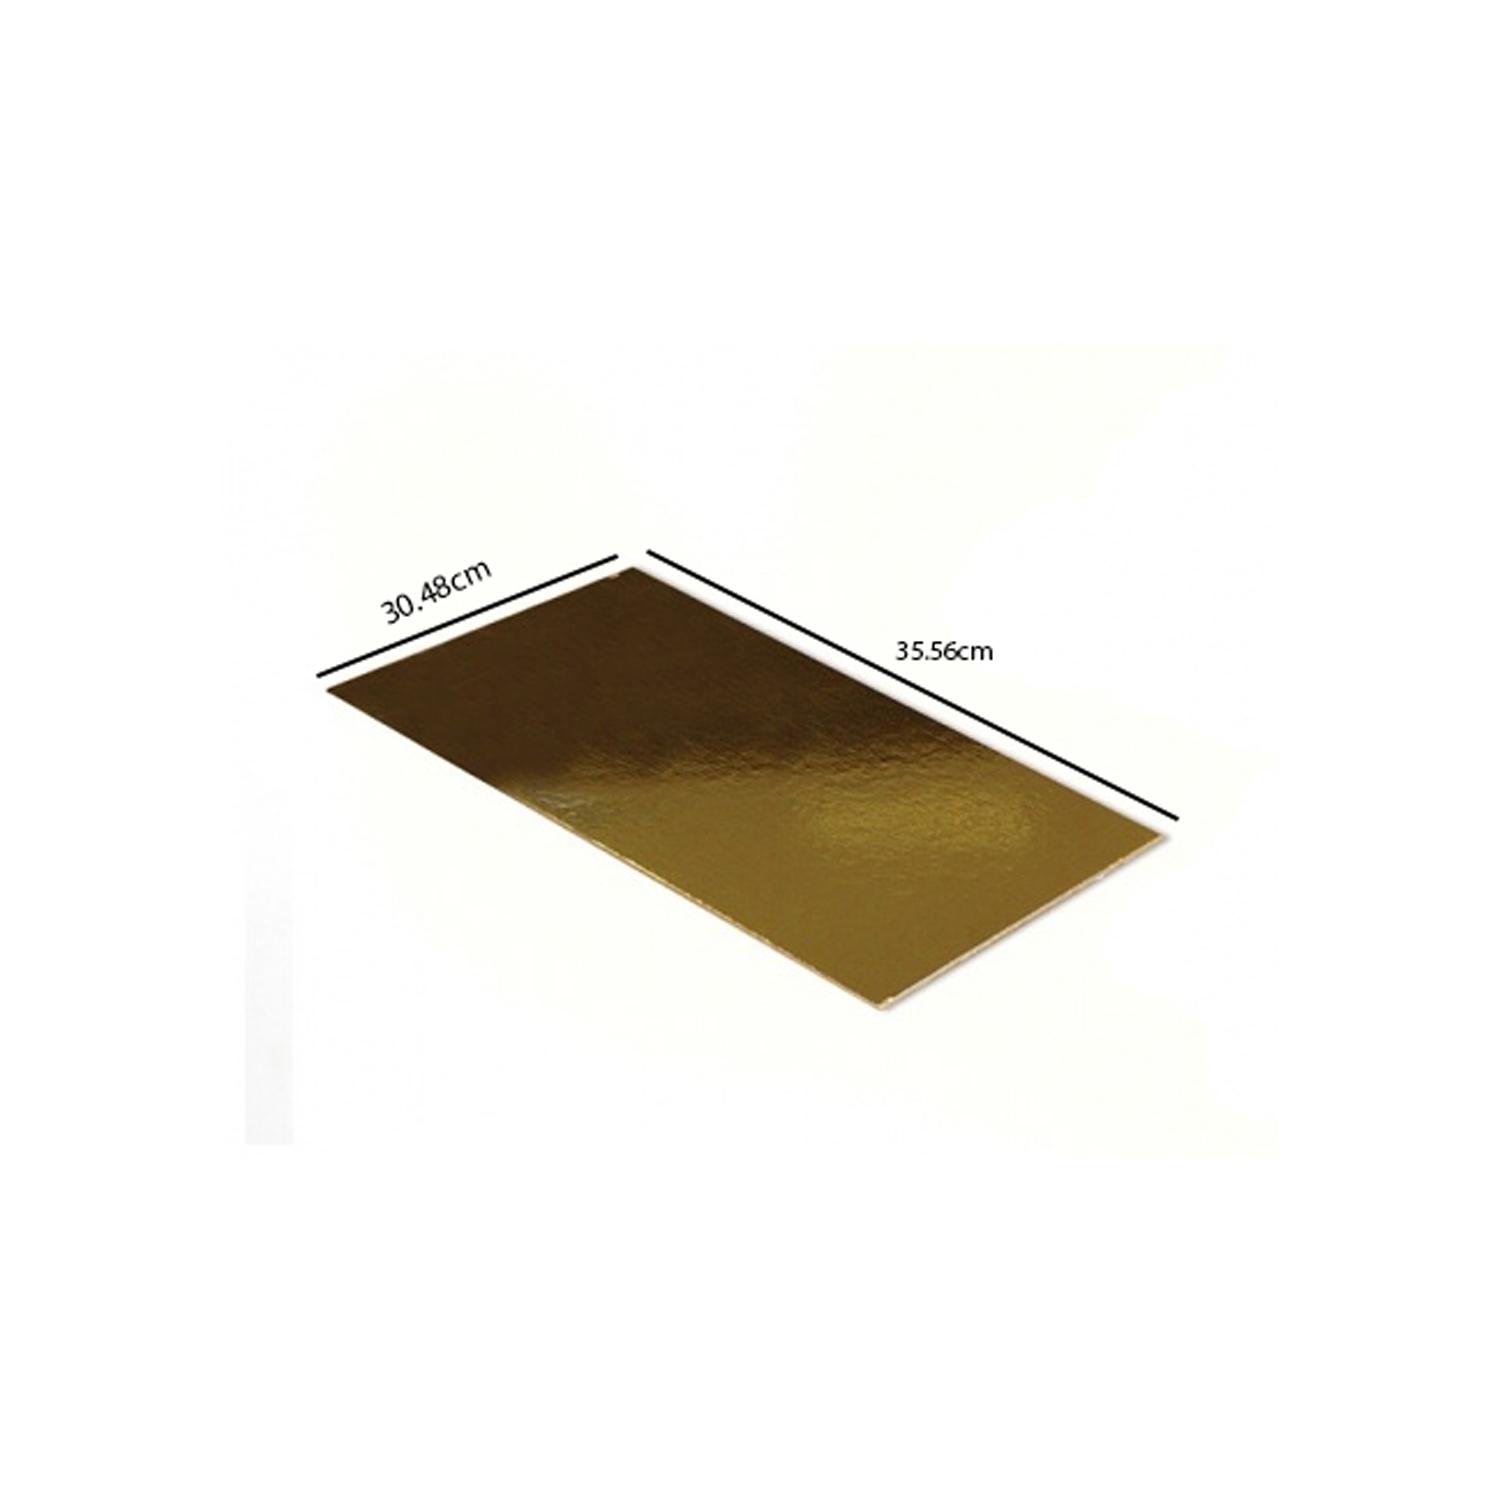 12'' X 14'' RECTANGLE SMOOTH GOLD CAKE BOARD